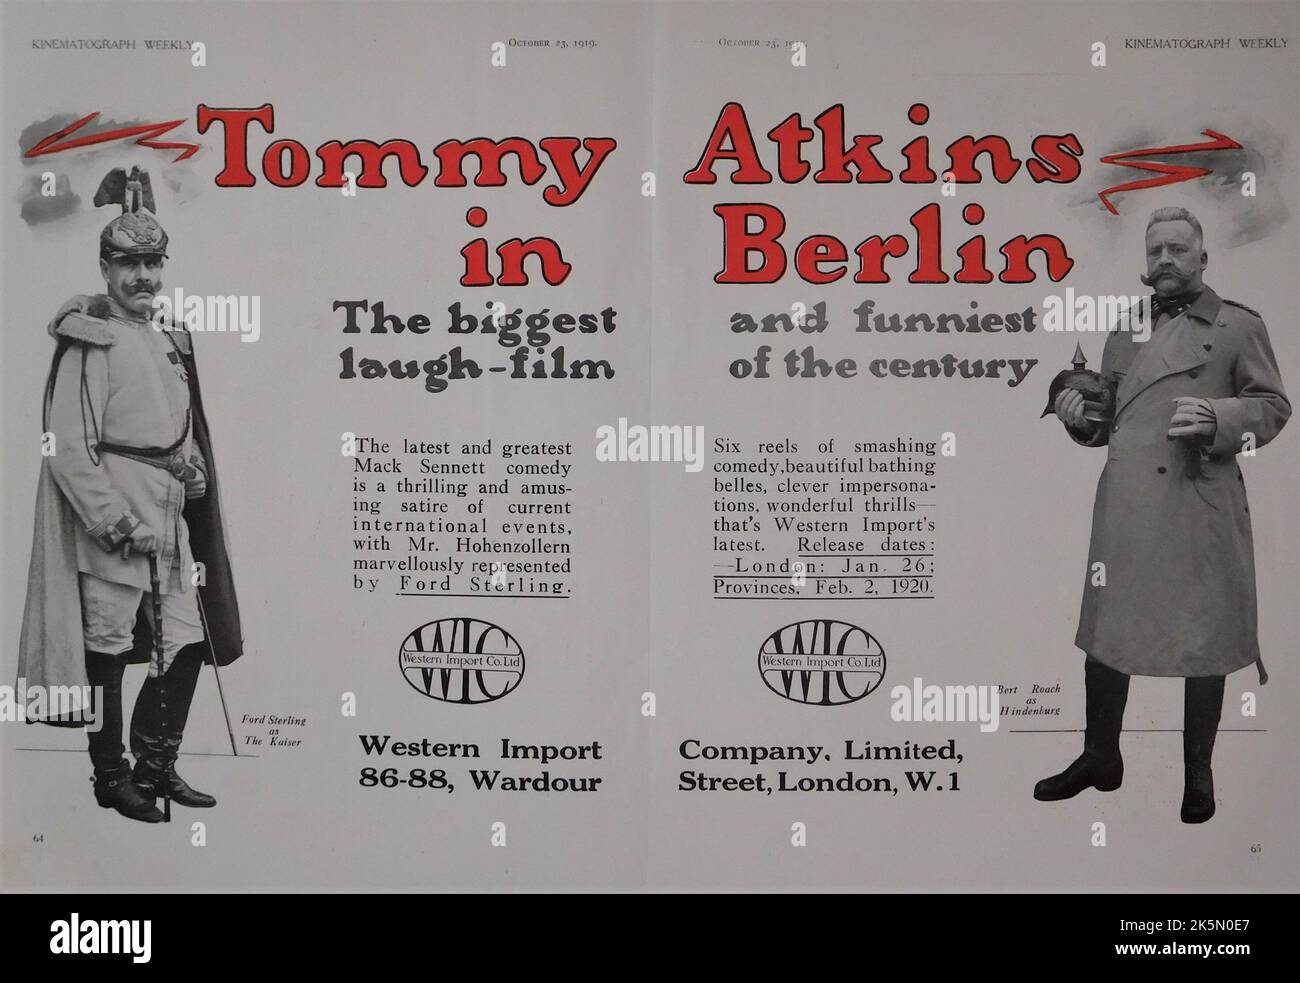 FORD STERLING as Kaiser Bill and BERT ROACH as Von Hindenburg in the Feature Comedy TOMMY ATKINS IN BERLIN (UK) / YANKEE DOODLE IN BERLIN (US) 1919 director F. RICHARD JONES story Mack Sennett Mack Sennett Comedies / Western Import Company Limited (UK) Stock Photo